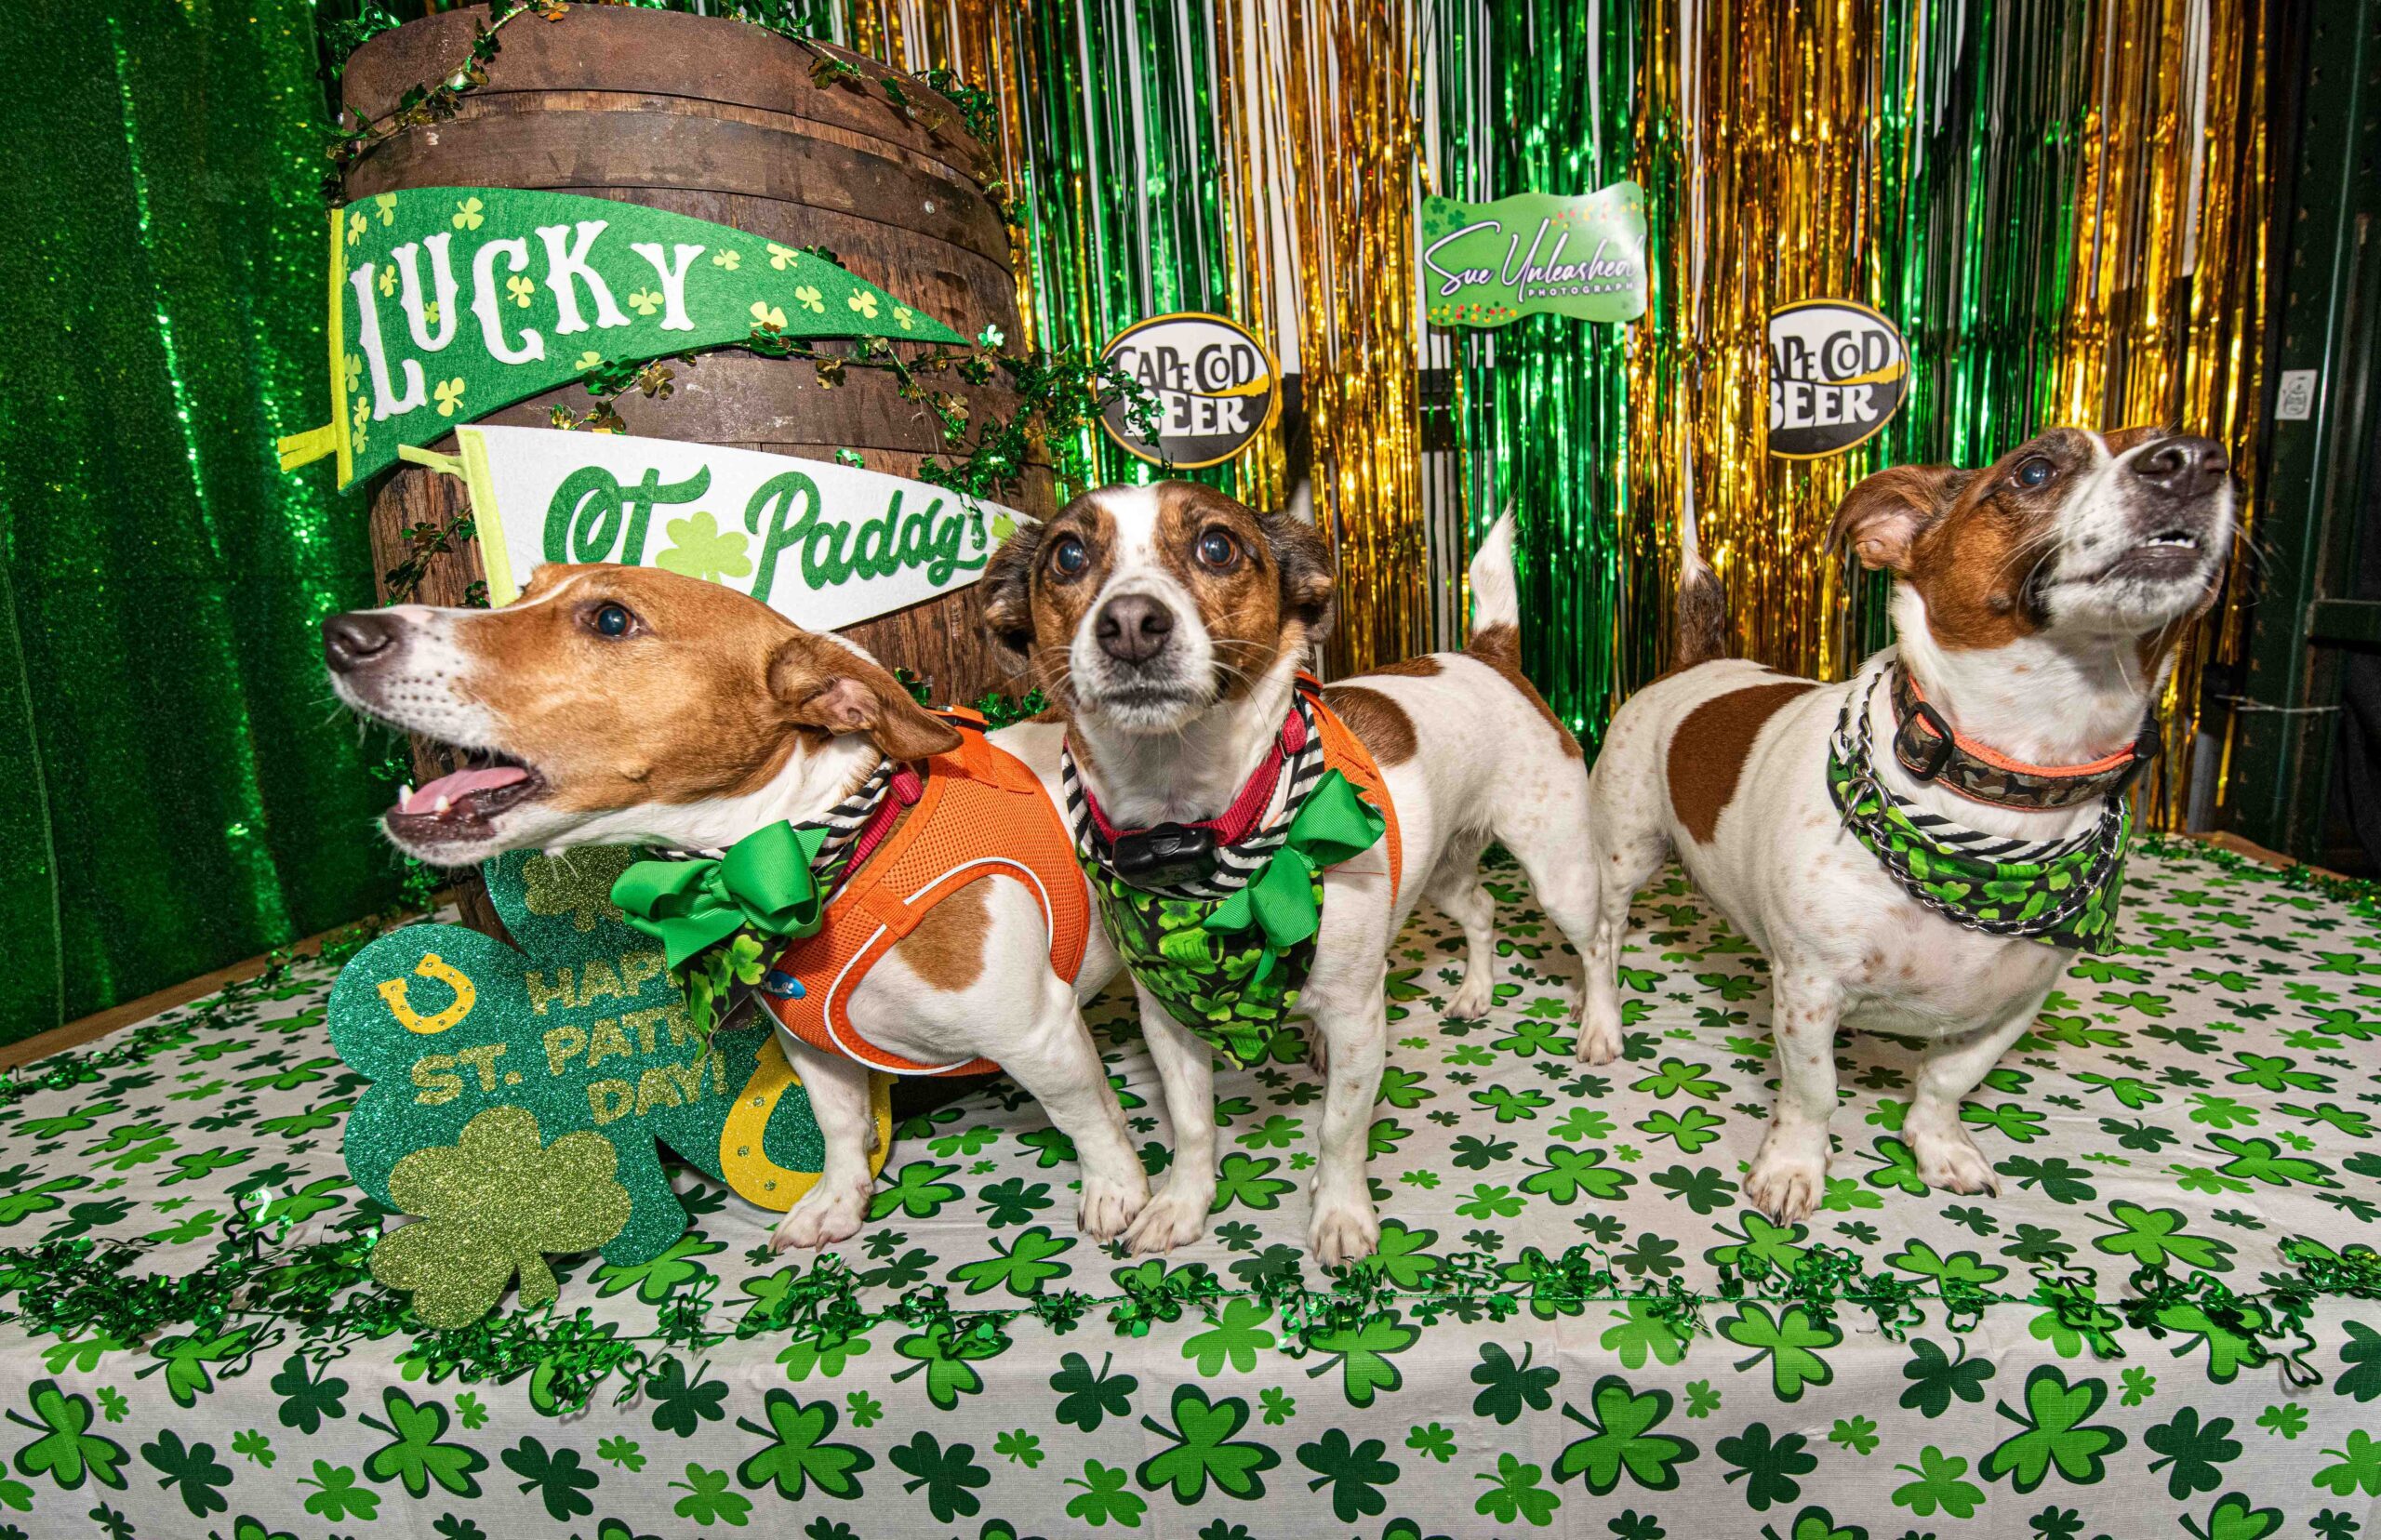 3 Jack Russell Terriors compete for attention in a photo booth at a Cape Cod Beer event.